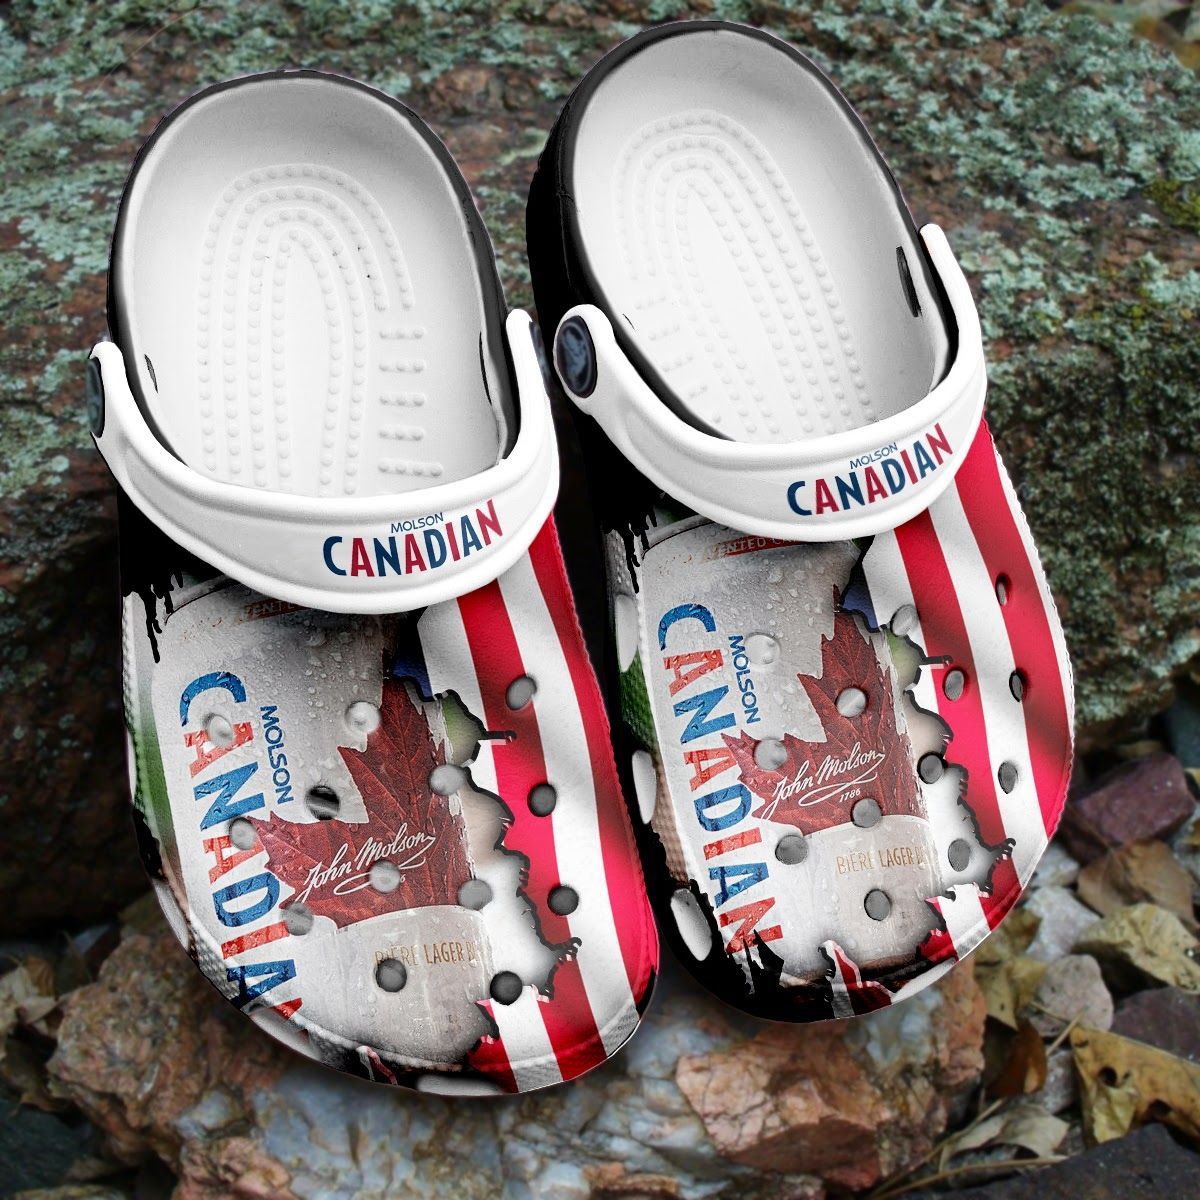 If you'd like to purchase a pair of Crocband Clogs, be sure to check out the official website. 109